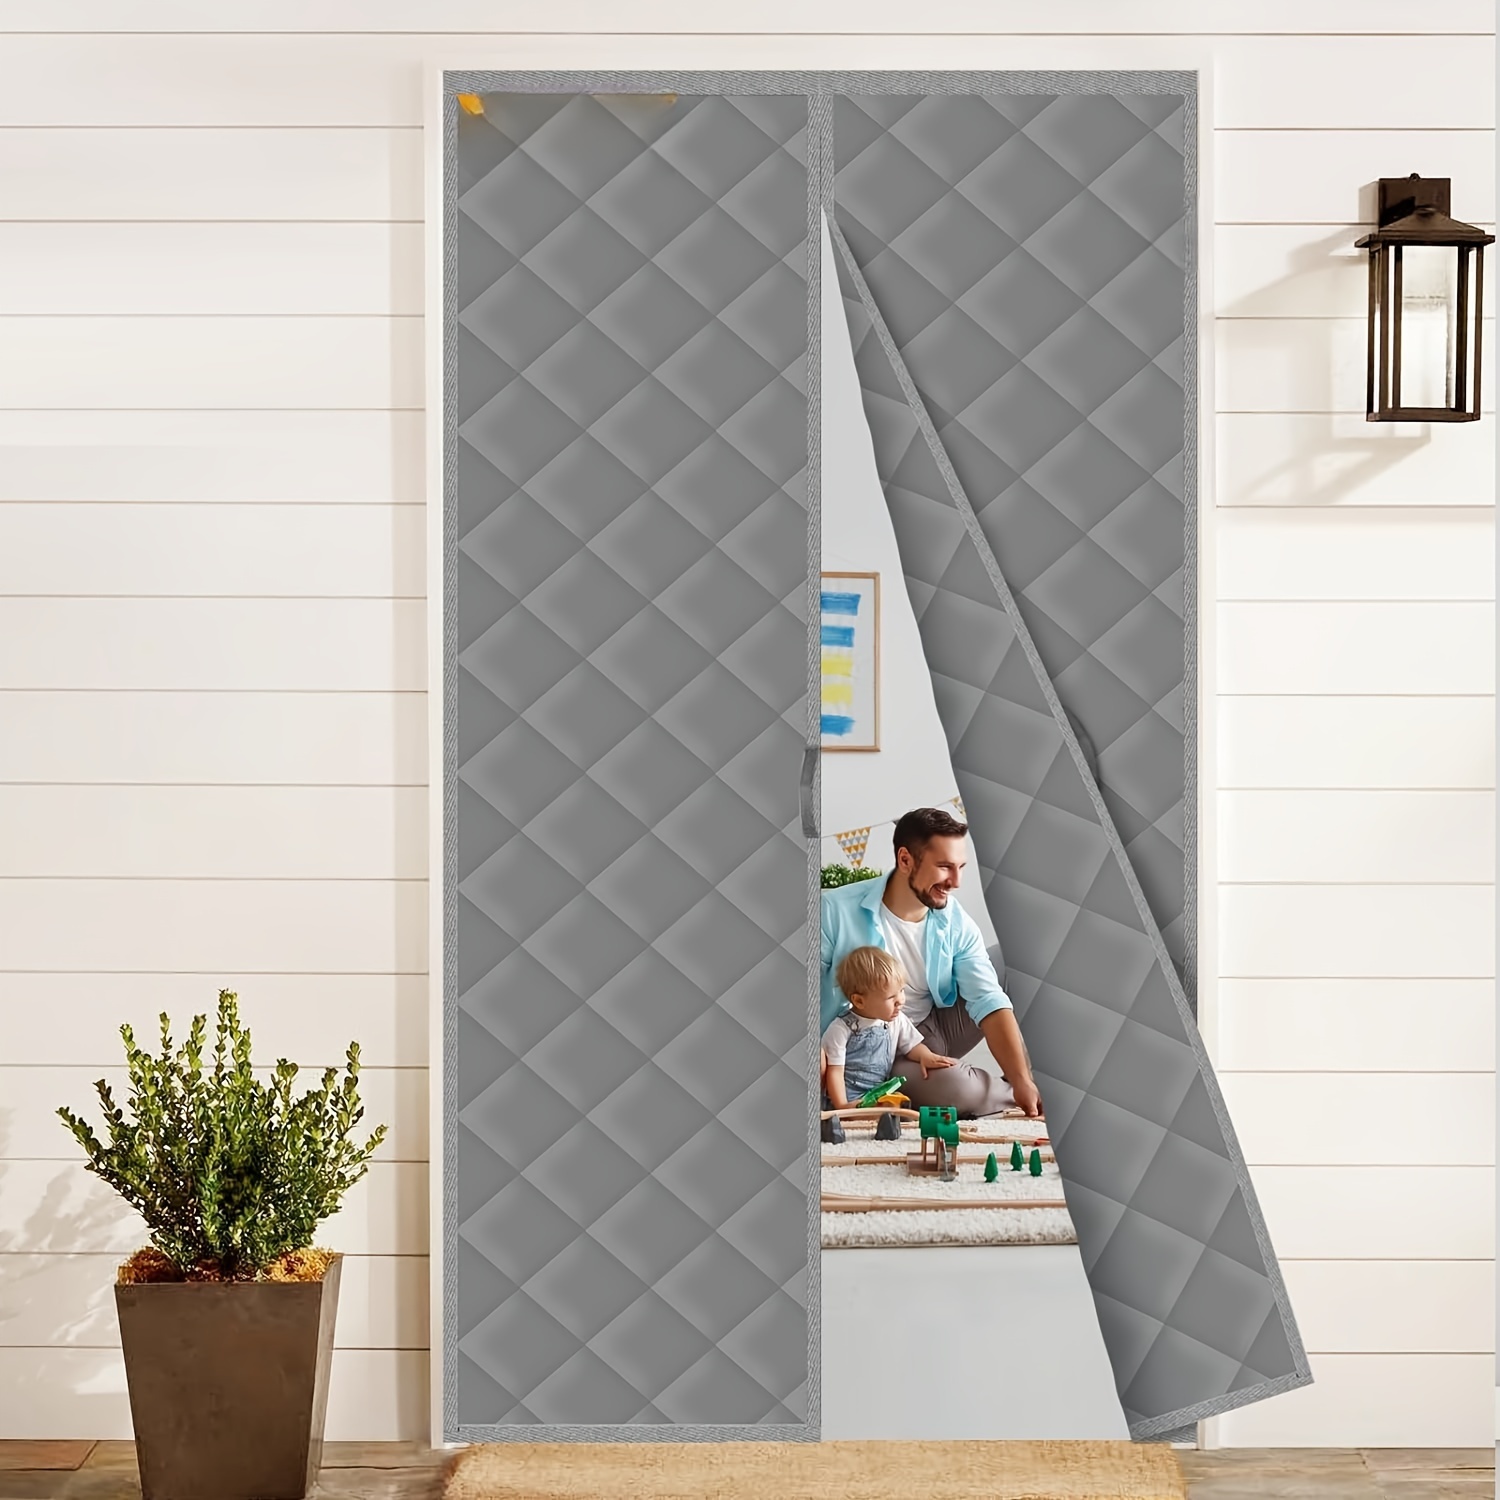 

Magnetic Thermal Insulated Door Curtain, Upgraded Oxford Cloth Filled With Thicken Cotton, Front Back Doorway Window Door Screen Mesh Insulation Cover Blanket Winter